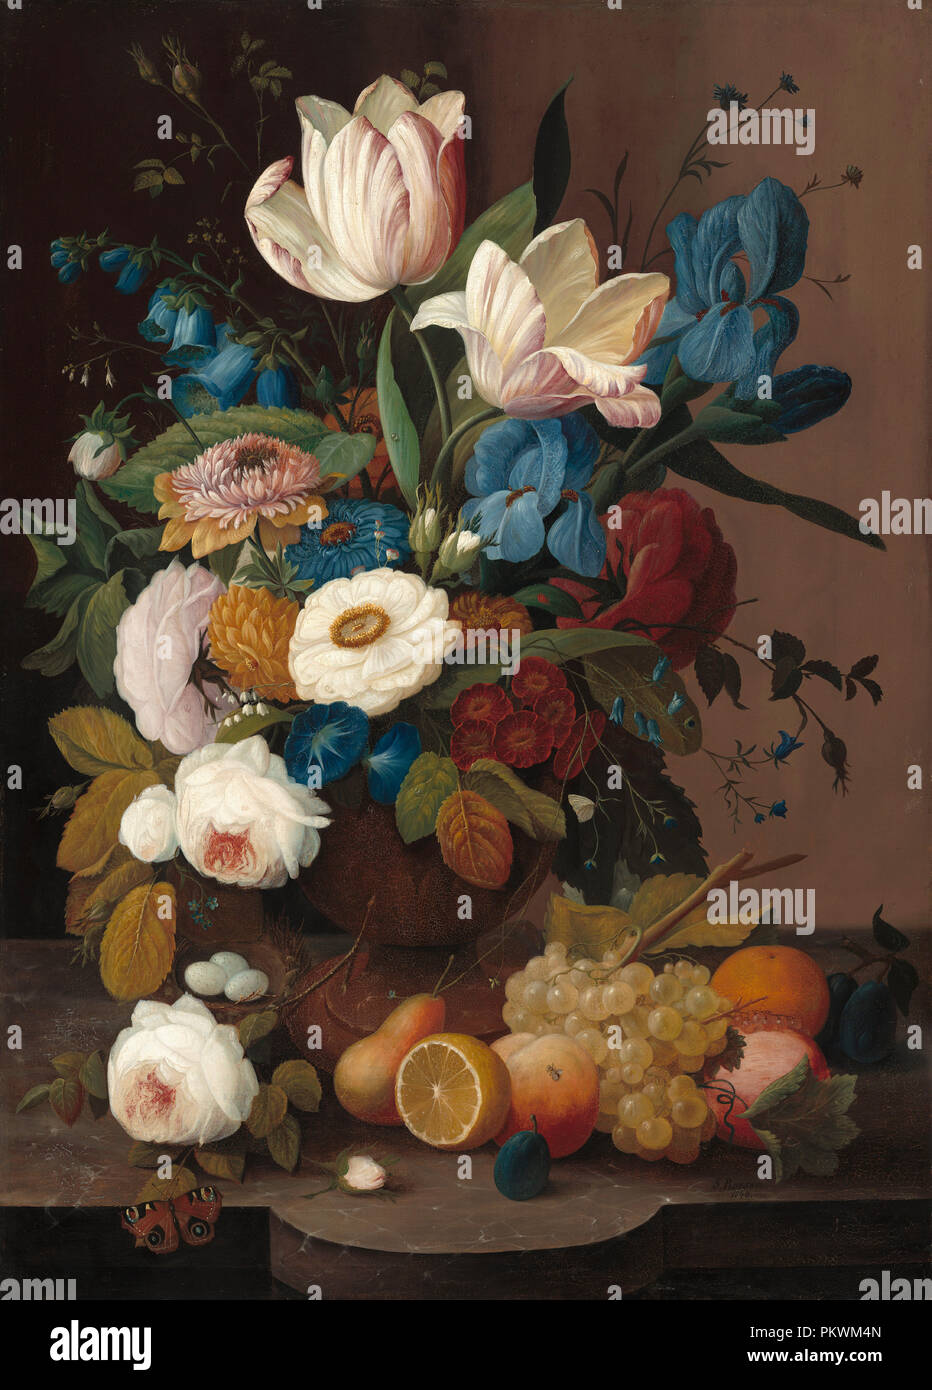 Still Life, Flowers, and Fruit. Dated: 1848. Dimensions: overall: 91.44 × 66.04 cm (36 × 26 in.)  framed: 108 × 82.6 × 5.7 cm (42 1/2 × 32 1/2 × 2 1/4 in.). Medium: oil on canvas. Museum: National Gallery of Art, Washington DC. Author: Severin Roesen. Stock Photo